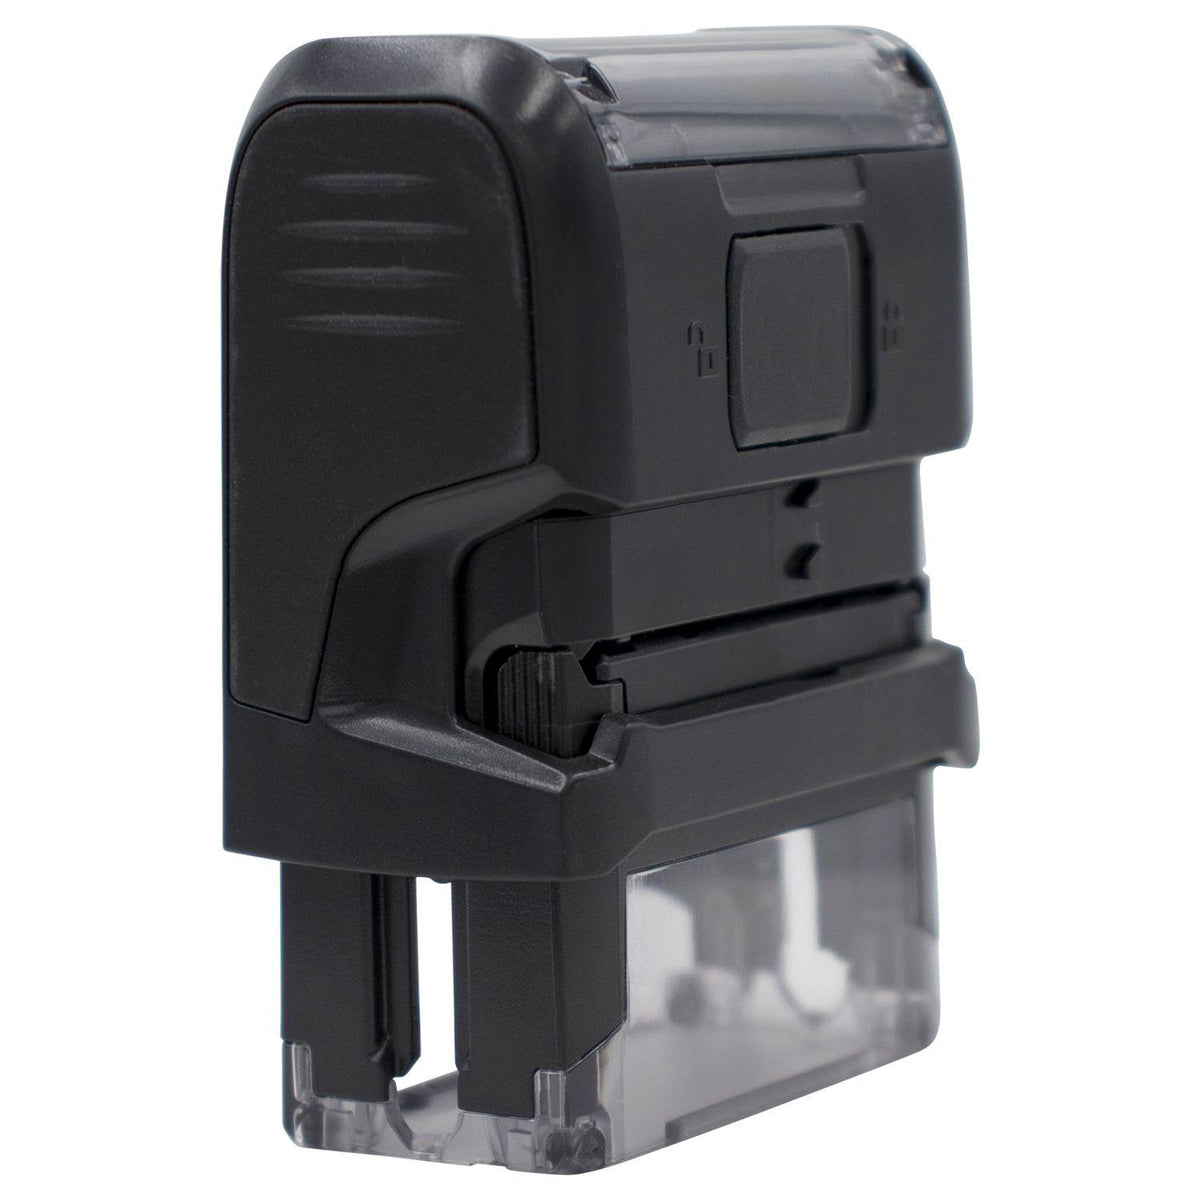 Large Self-Inking Narrow Benefits Assigned Stamp - Engineer Seal Stamps - Brand_Trodat, Impression Size_Large, Stamp Type_Self-Inking Stamp, Type of Use_Medical Office